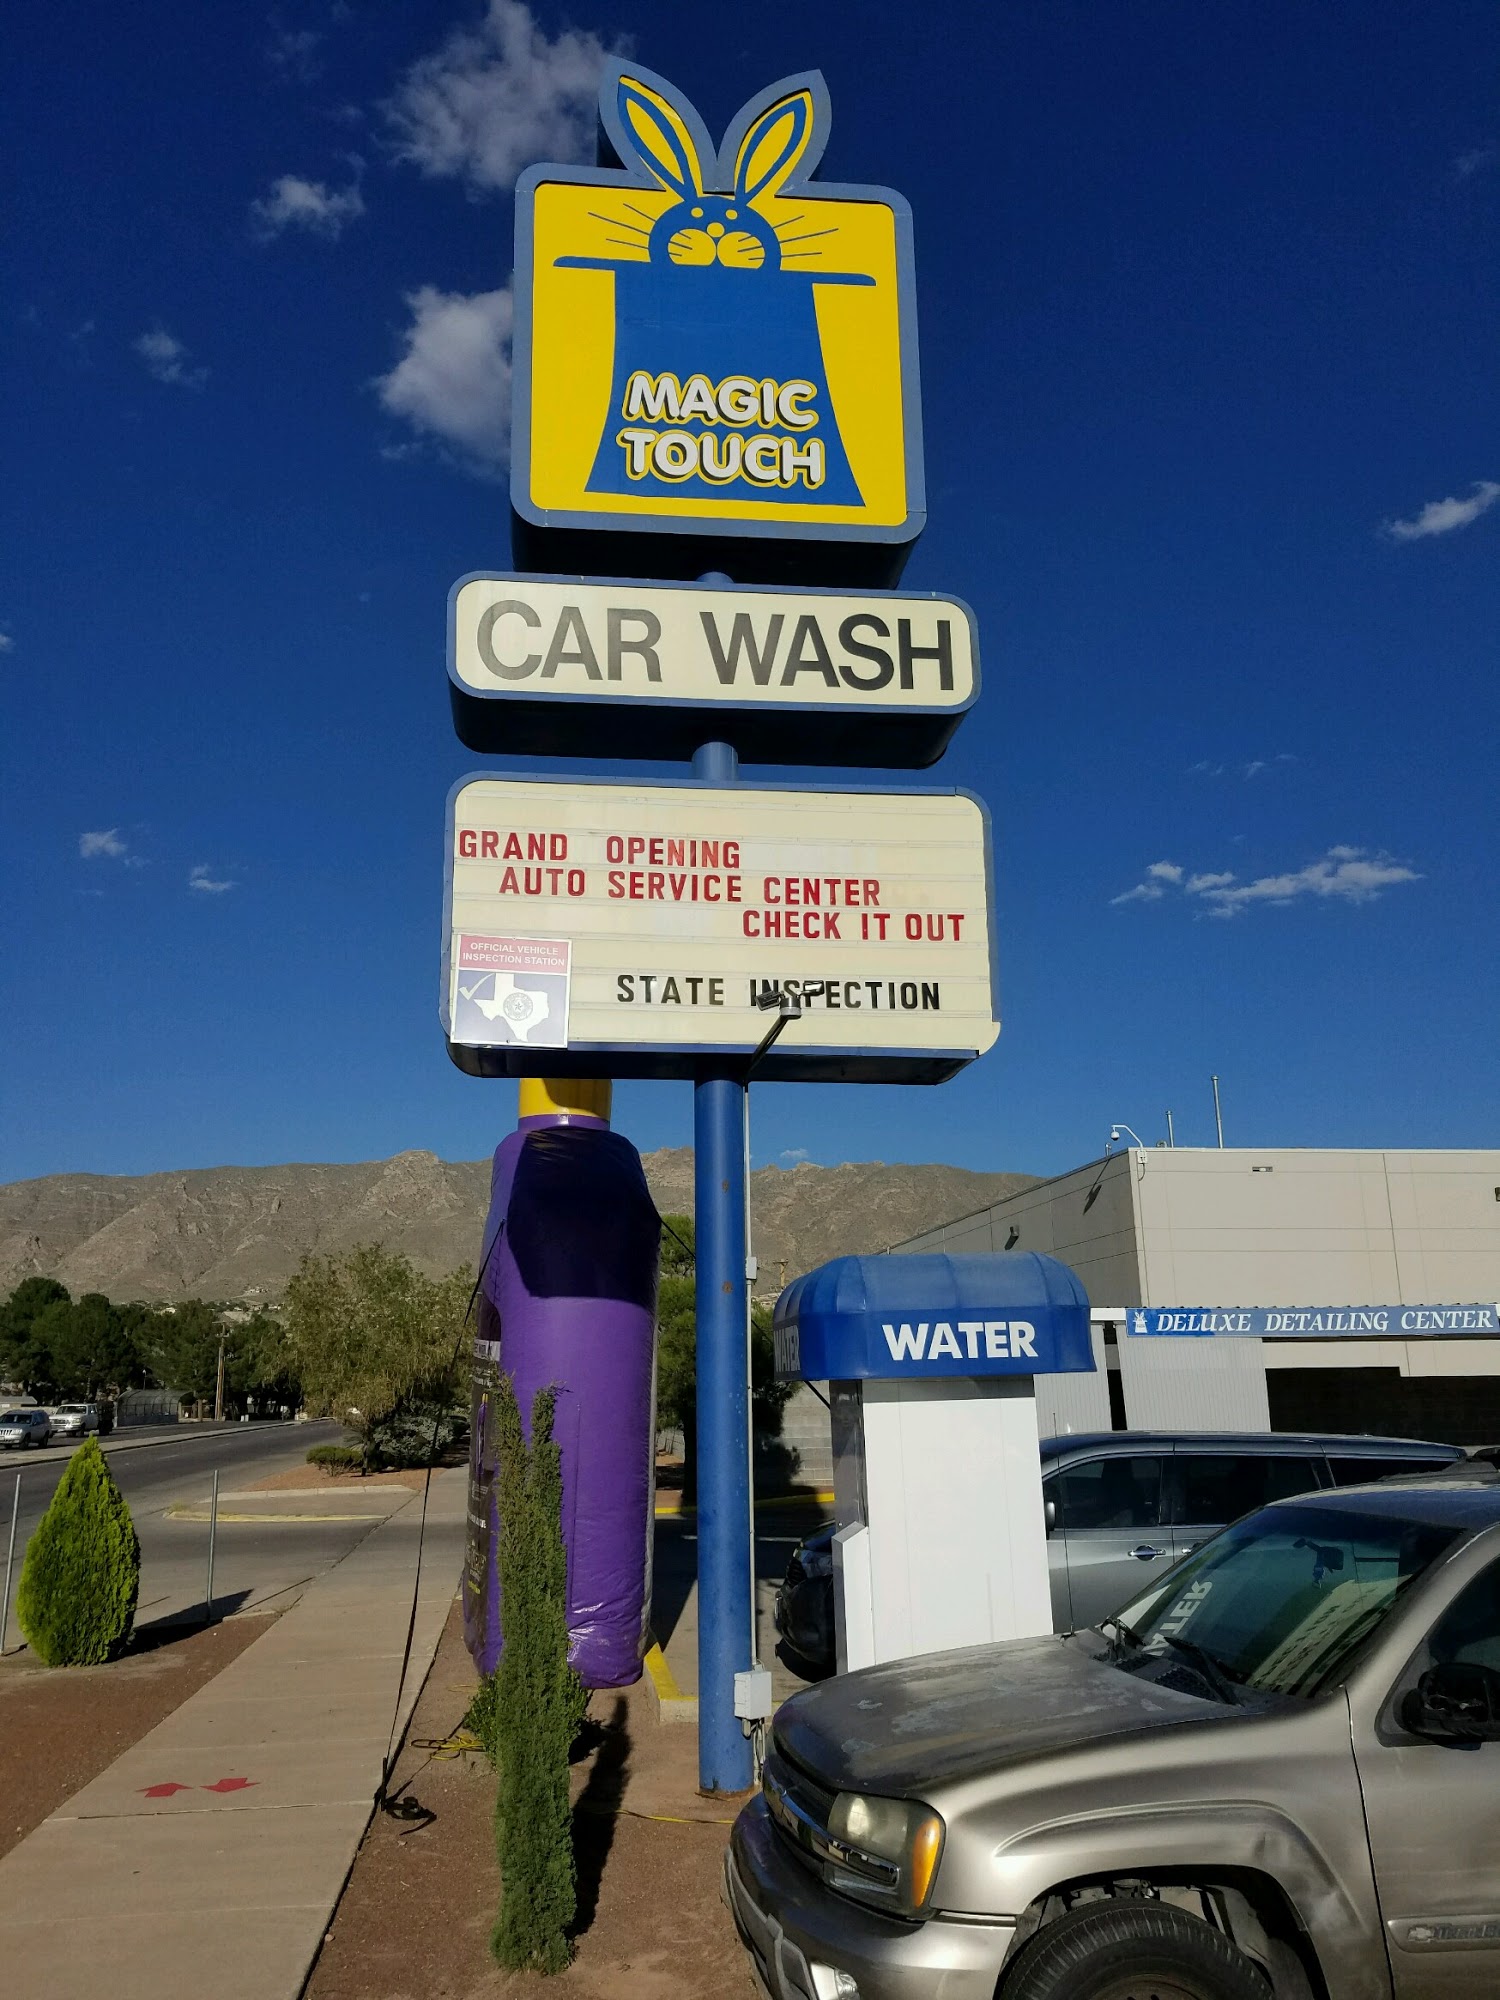 Magic Touch Car Wash and Automotive